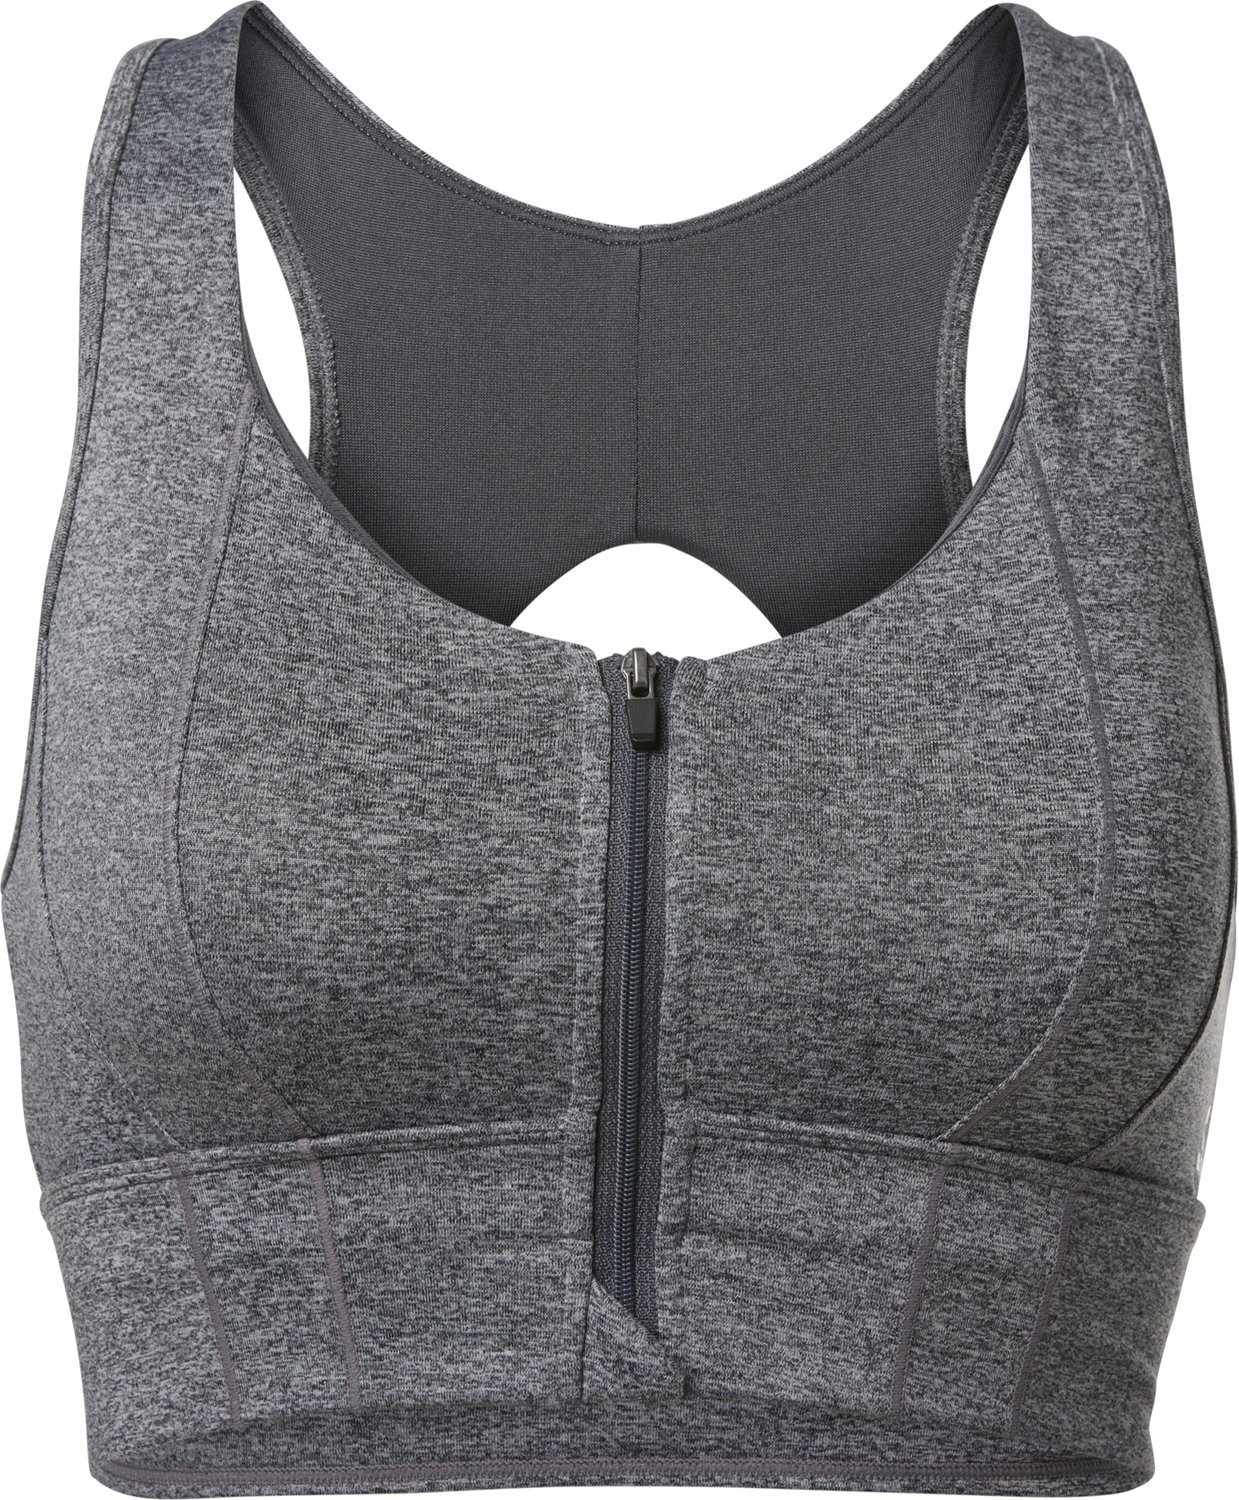 Buy VFUS Adjustable High Impact Sports Bras for Women Zip Front Full  Coverage and Lift Padded Compression Tops, Black, Large at